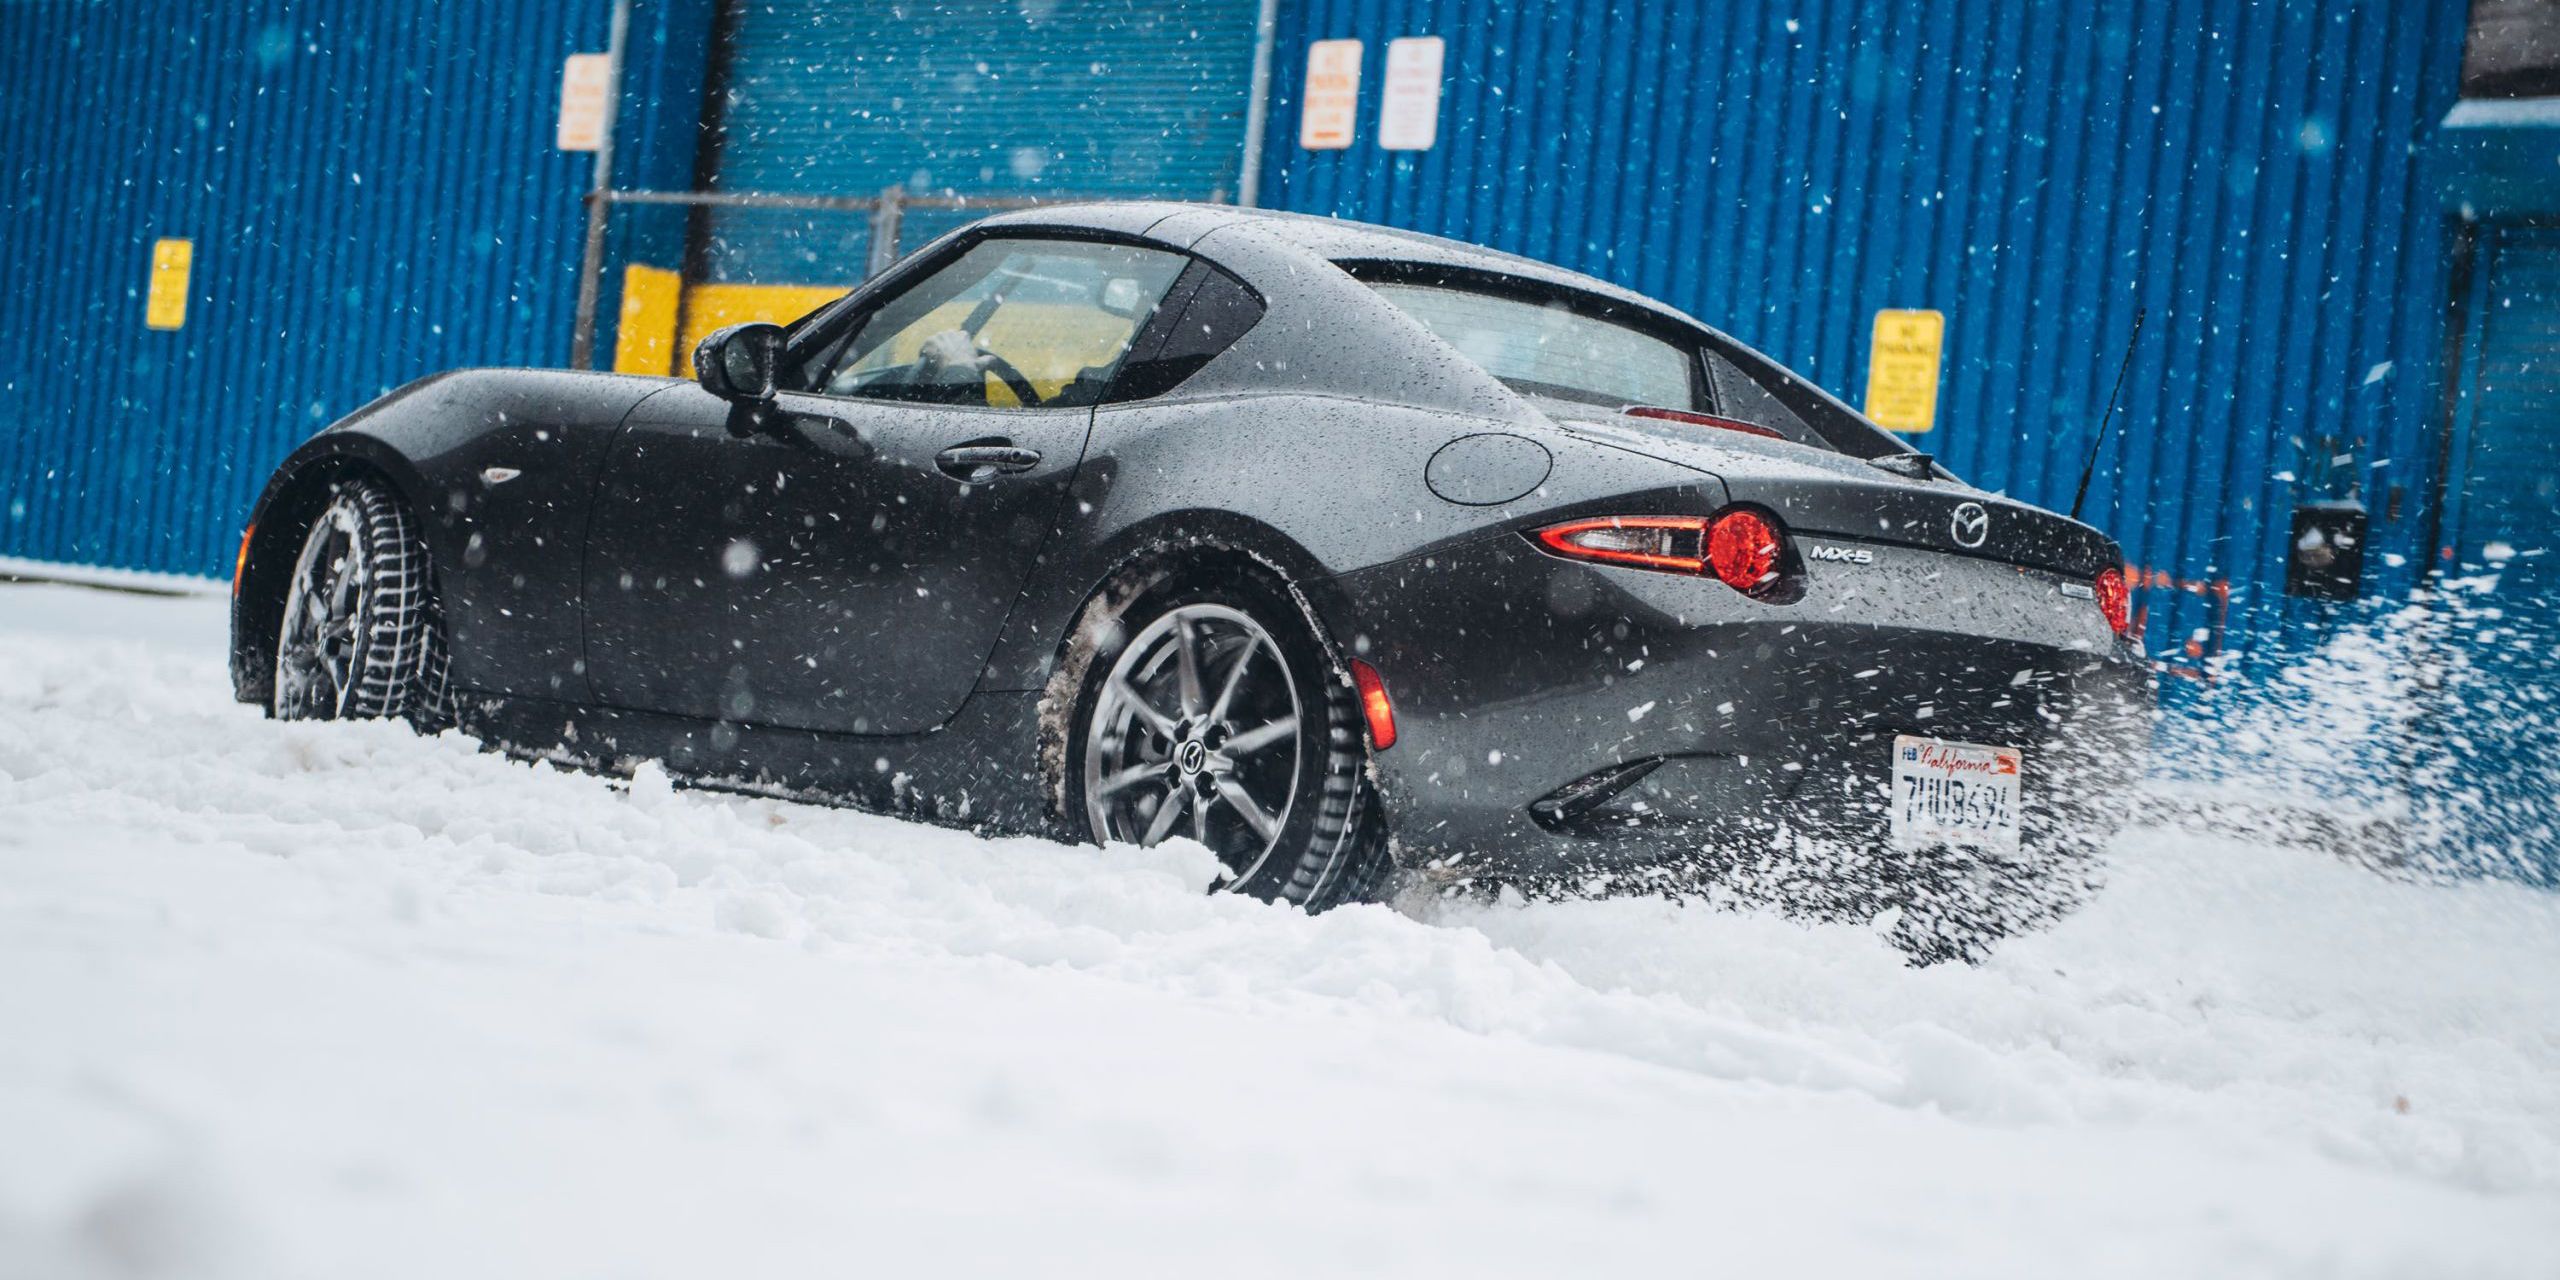 Every Question You've Ever Had About Winter Tires, Answered